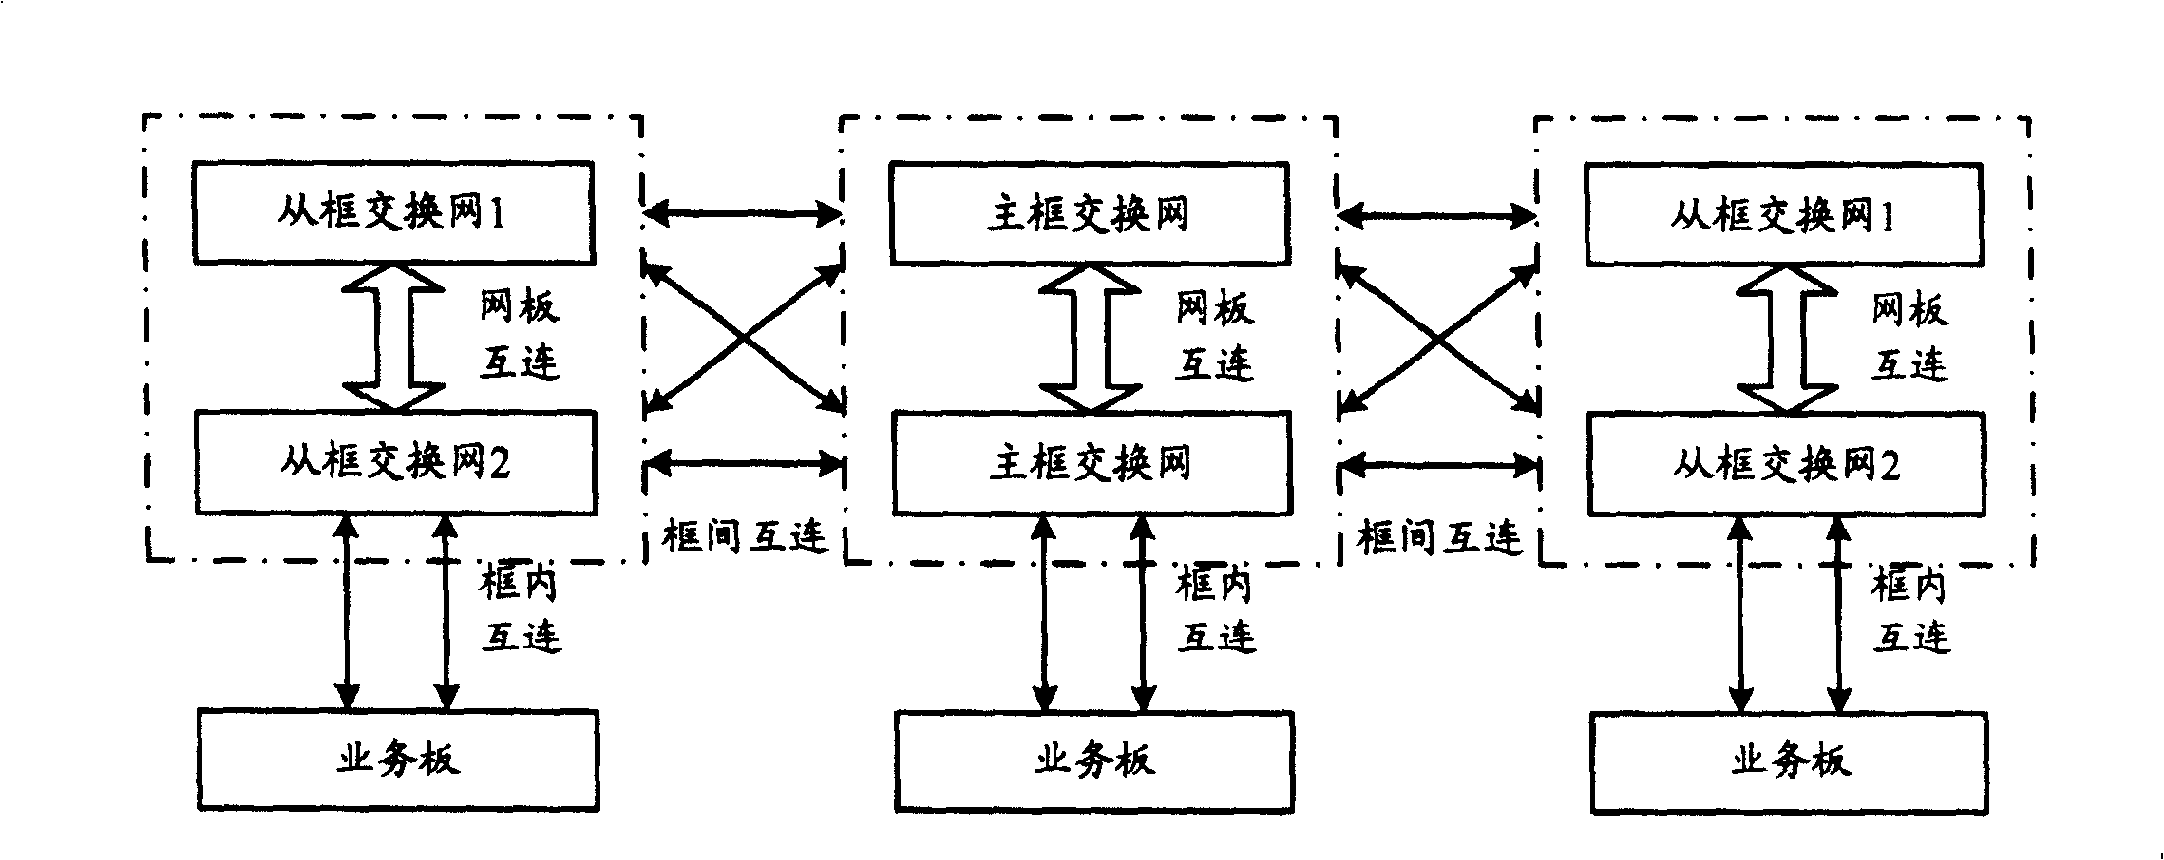 Internal reliable interconnect communication device